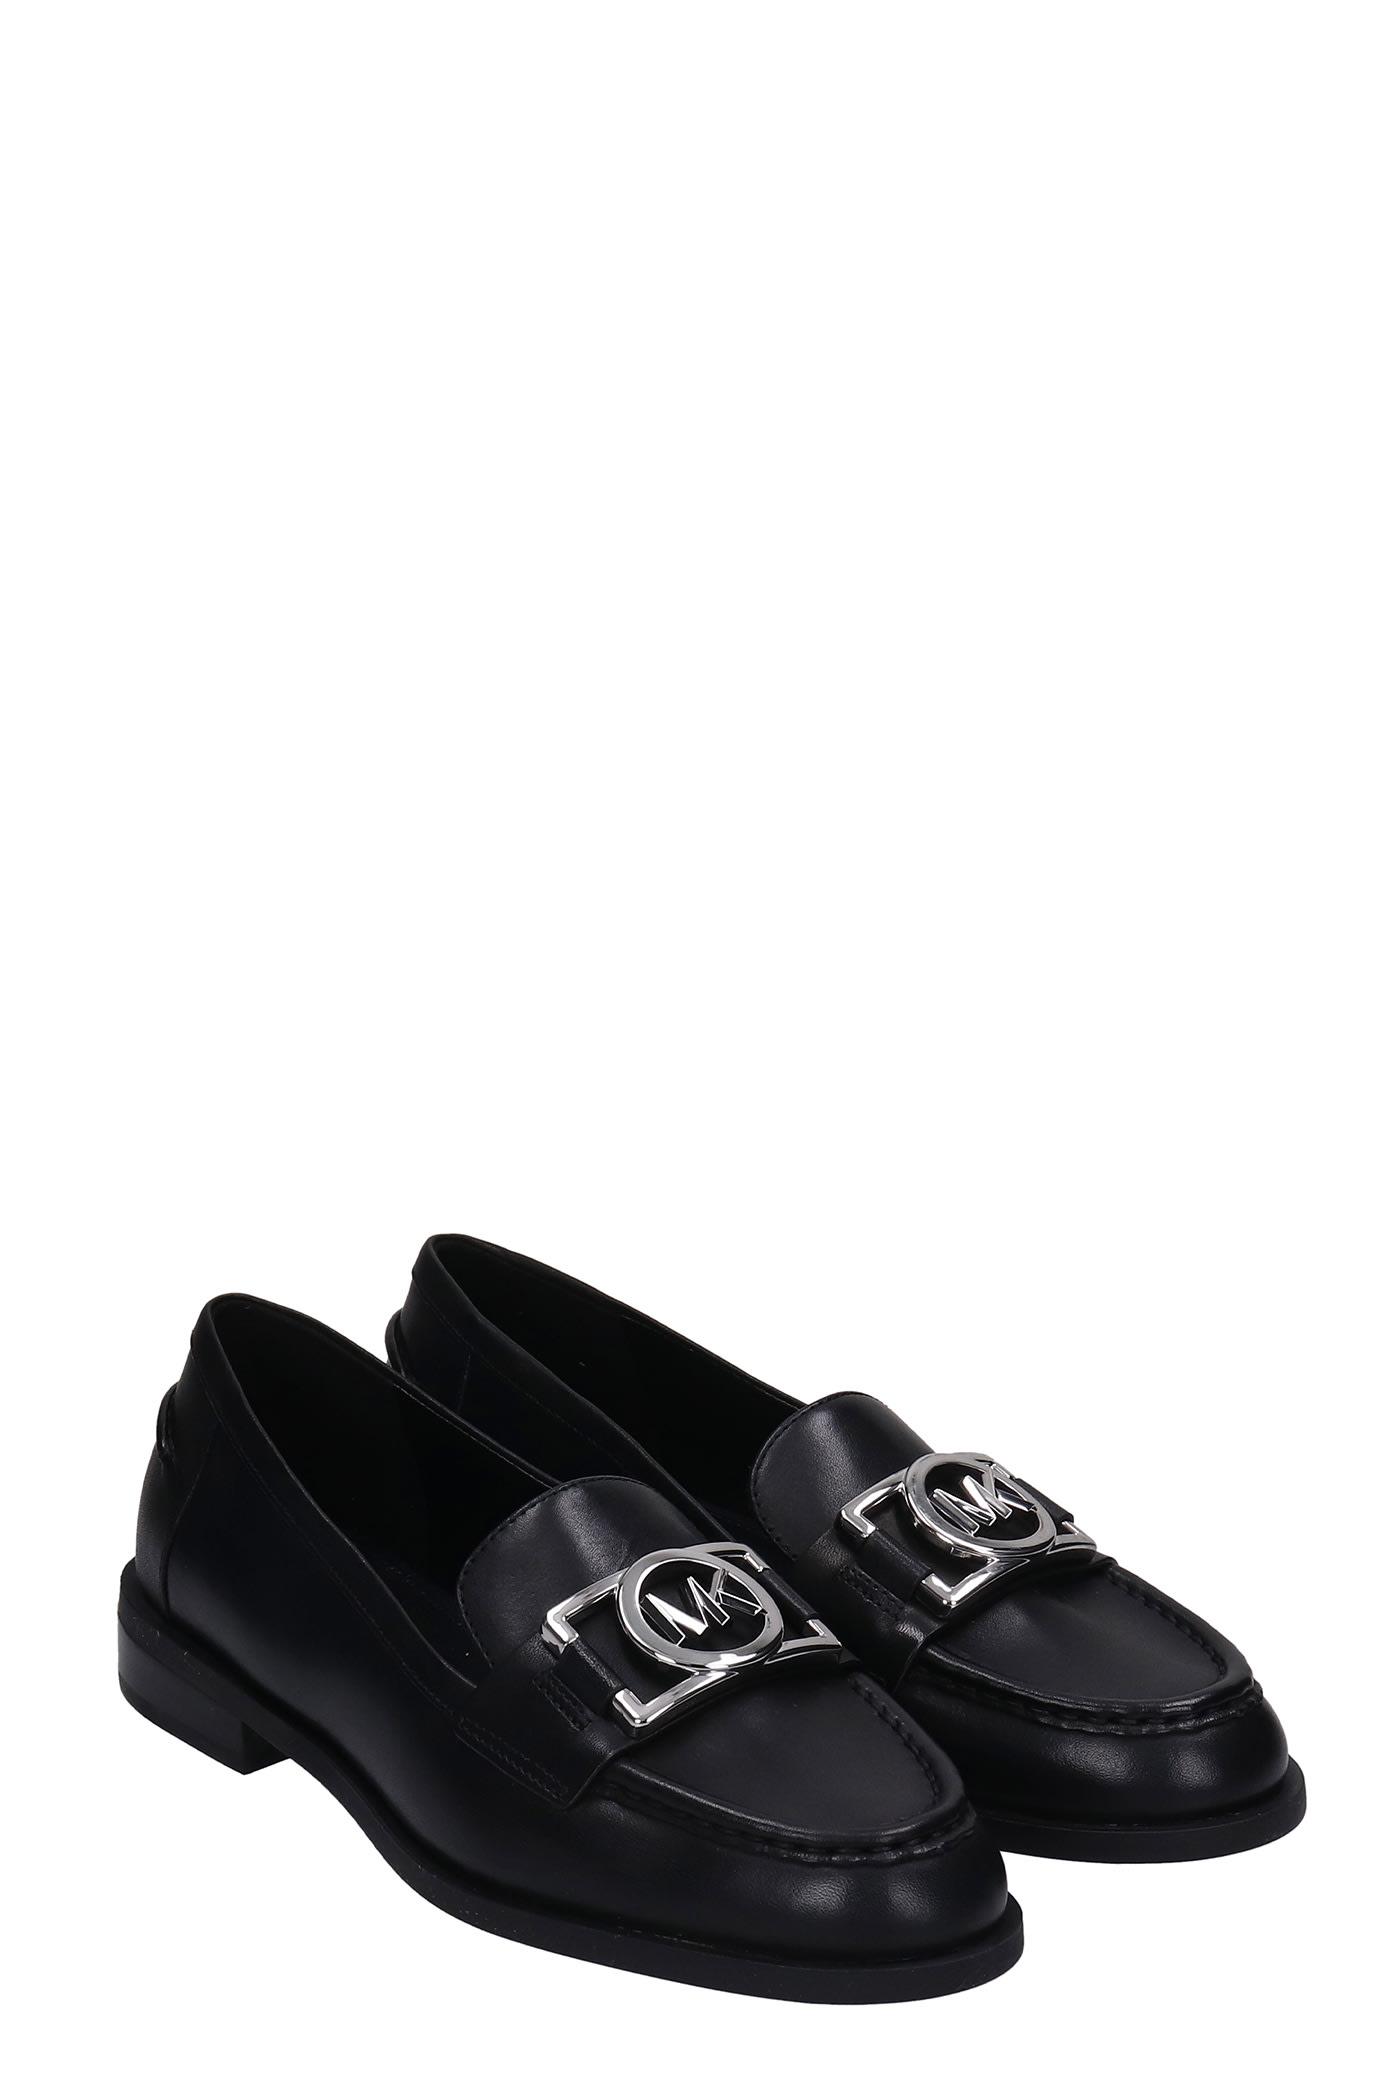 MICHAEL Michael Kors April Loafer Loafers In Black Leather | Lyst